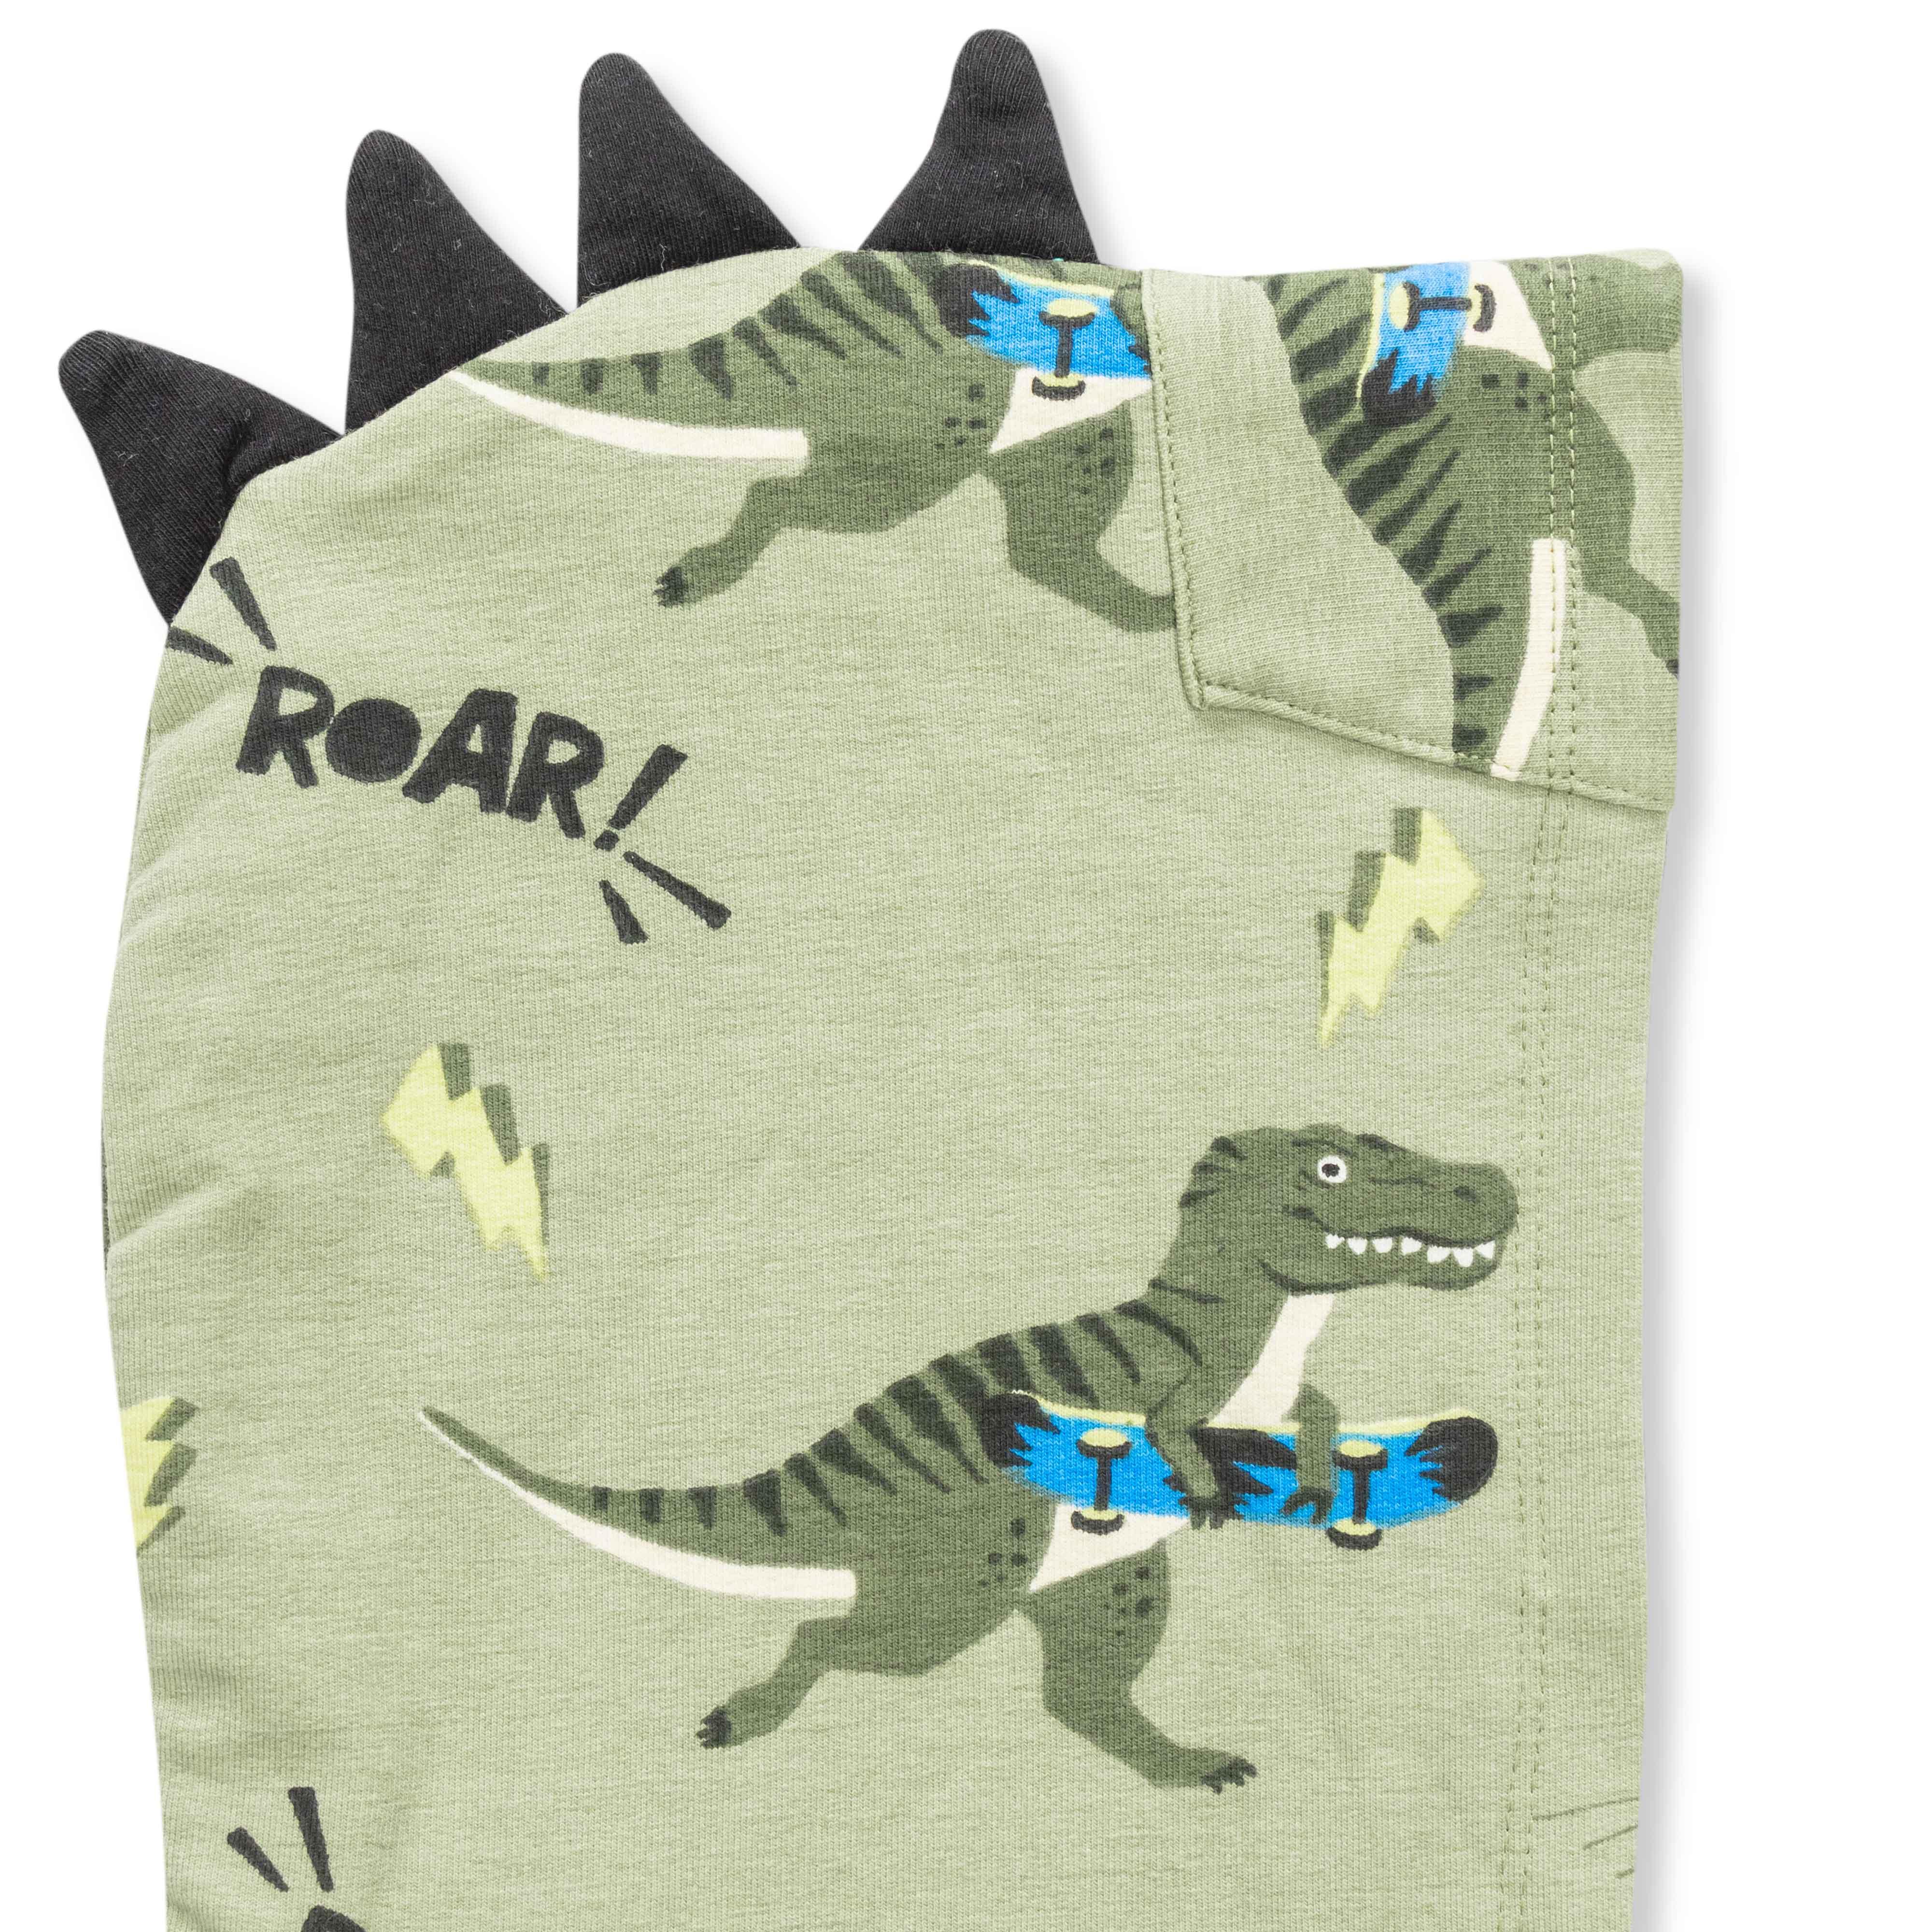 Baby Boys All Over Printed Hooded Sweatshirt - Juscubs